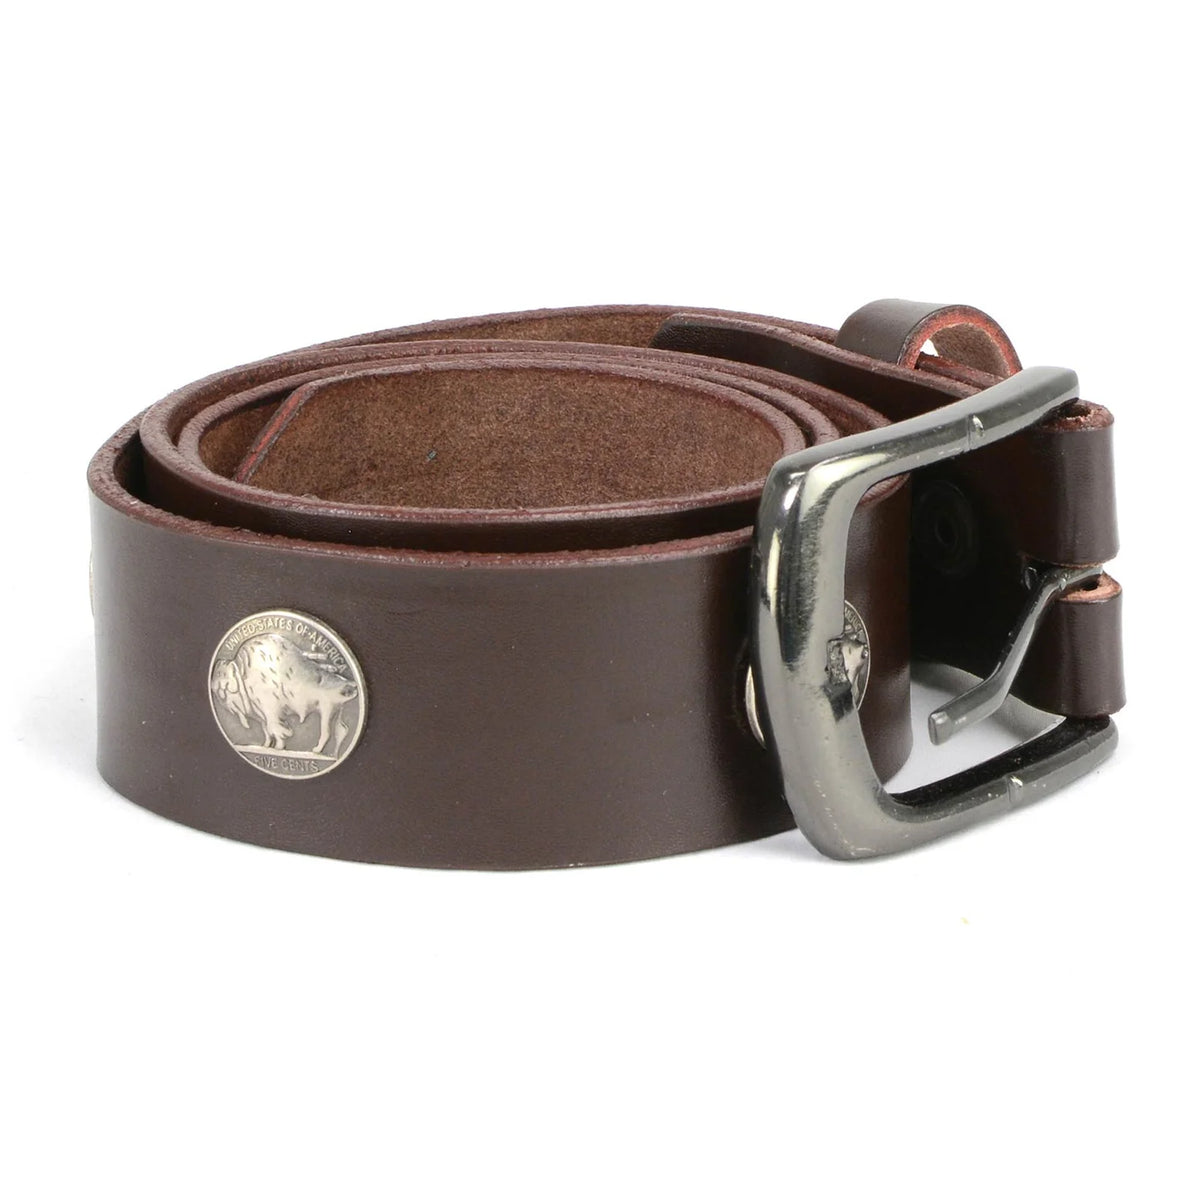 Men's 5 Cent Buffalo Coin - Brown Genuine Leather Belt with Interchangeable Buckle - 1.5 inches Wide